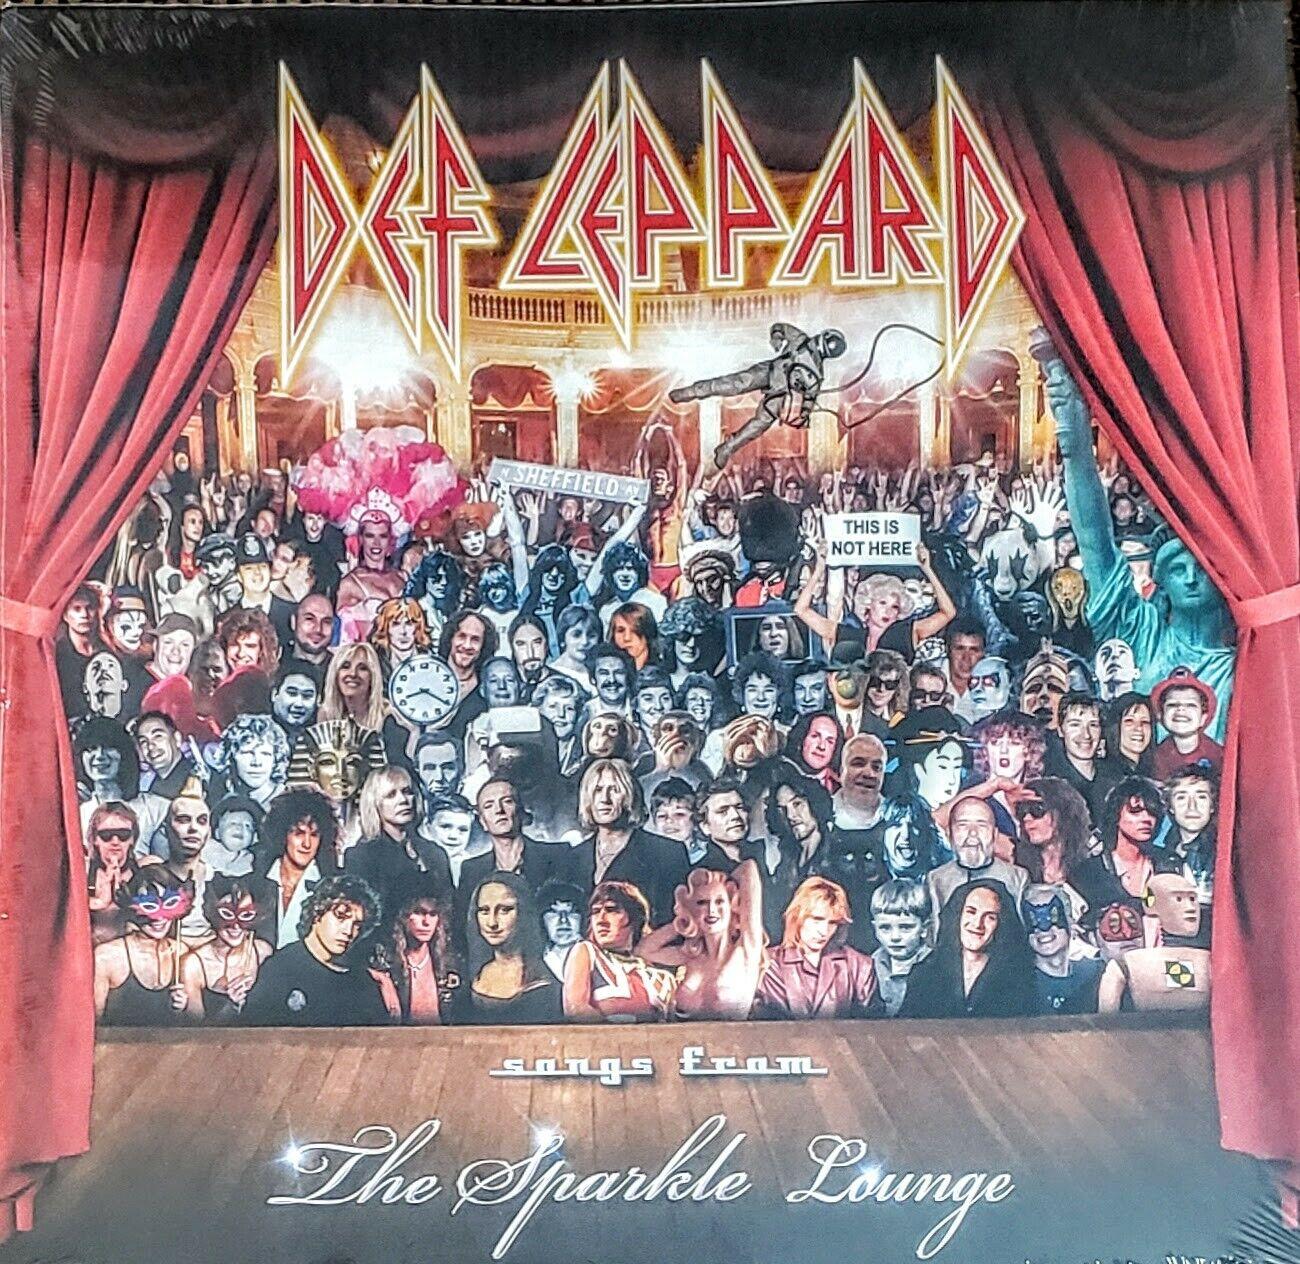 Selected image for DEF LEPPARD - Songs From The Sparkle Lounge (Vinyl)